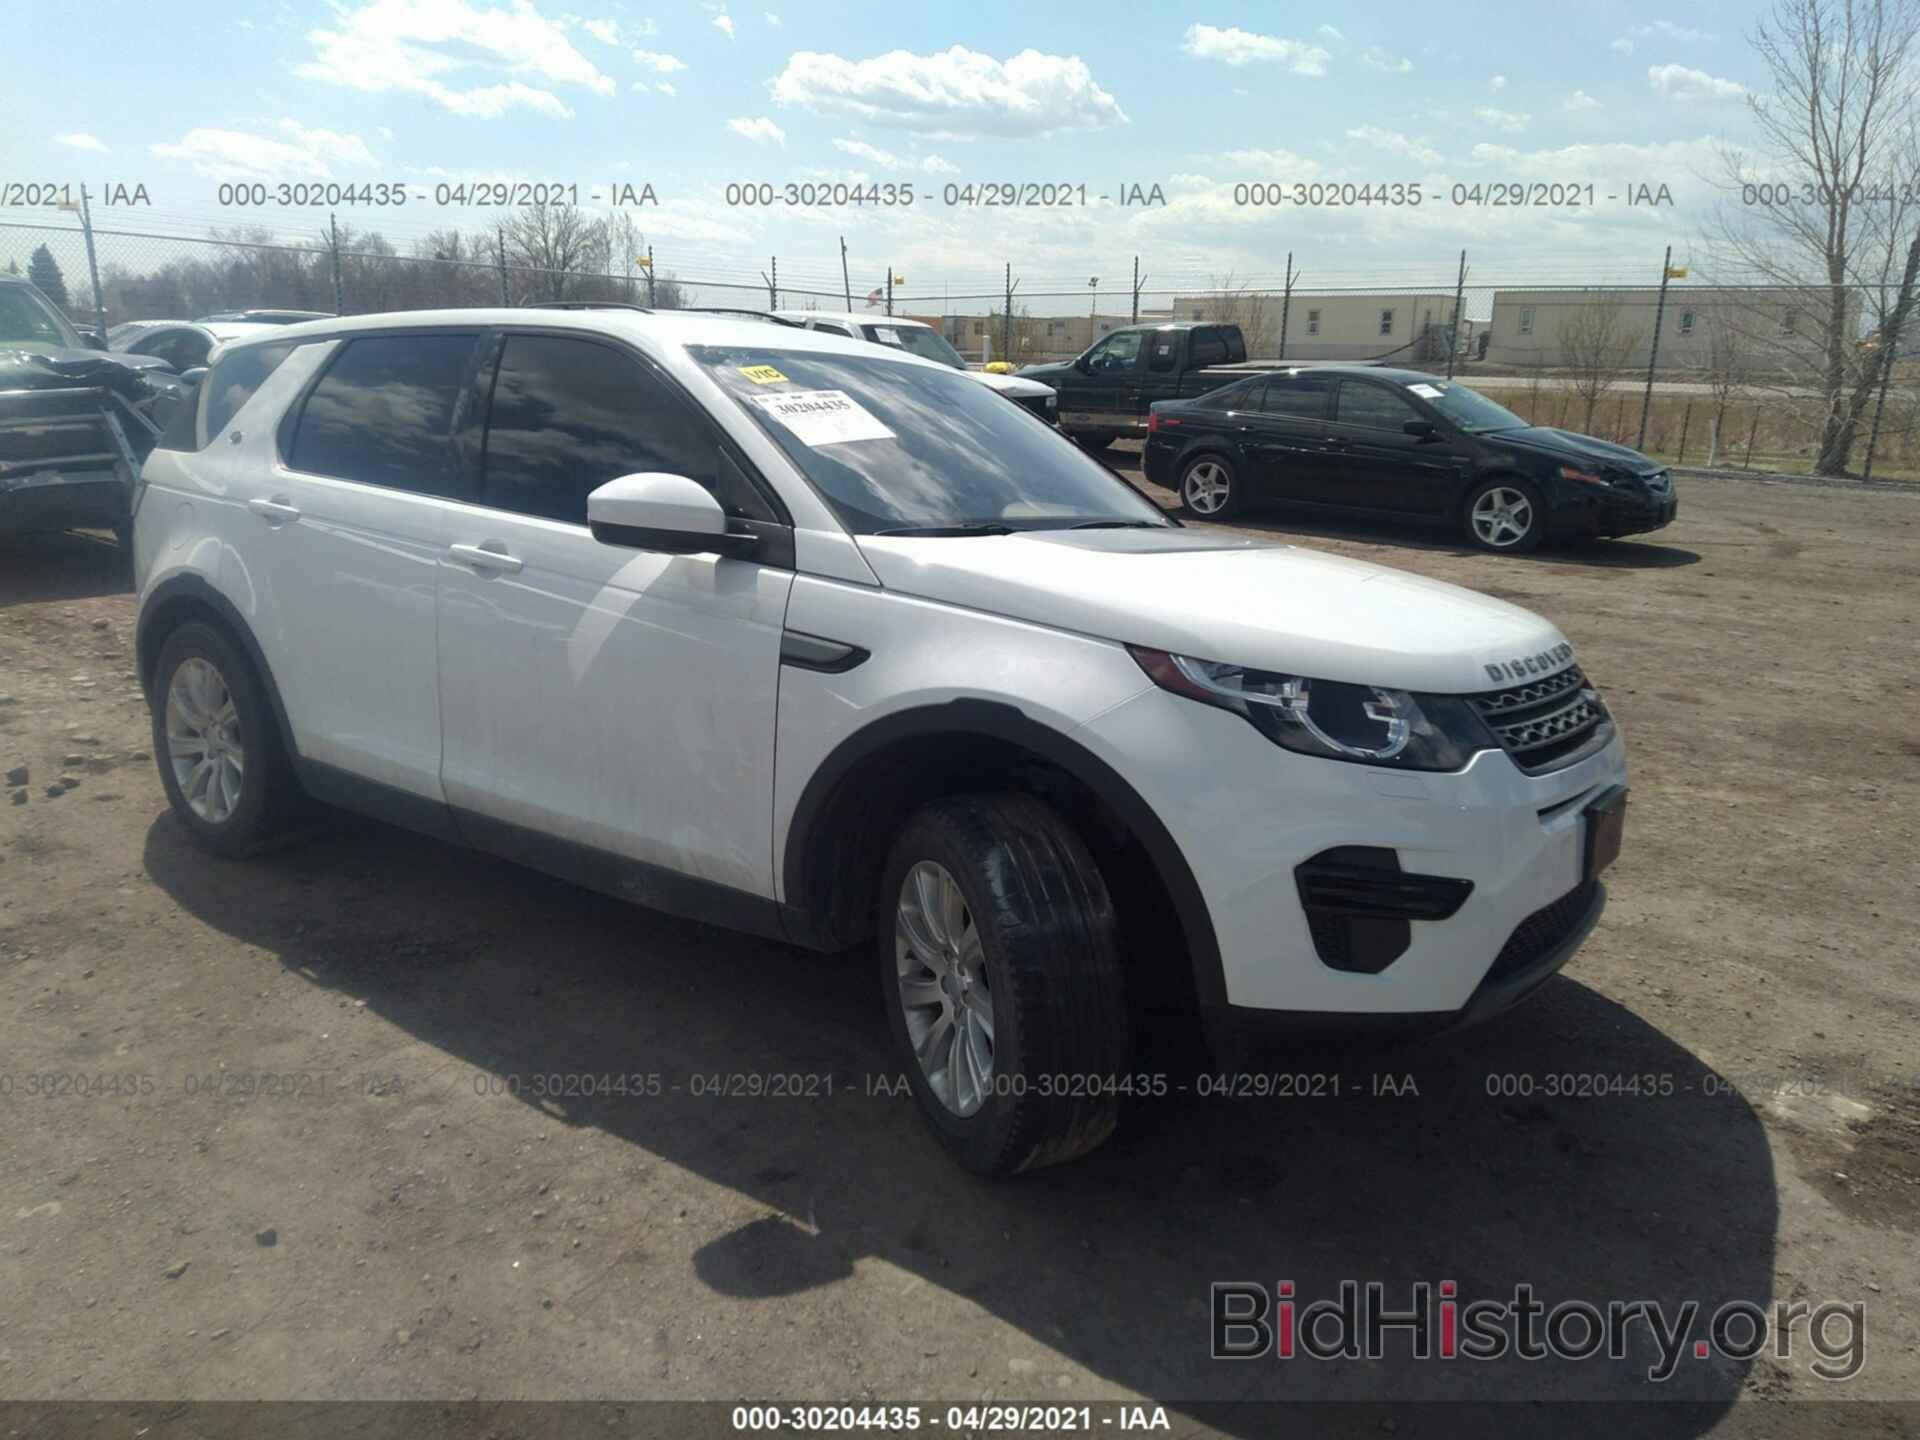 Фотография SALCP2RX6JH728146 - LAND ROVER DISCOVERY SPORT 2018